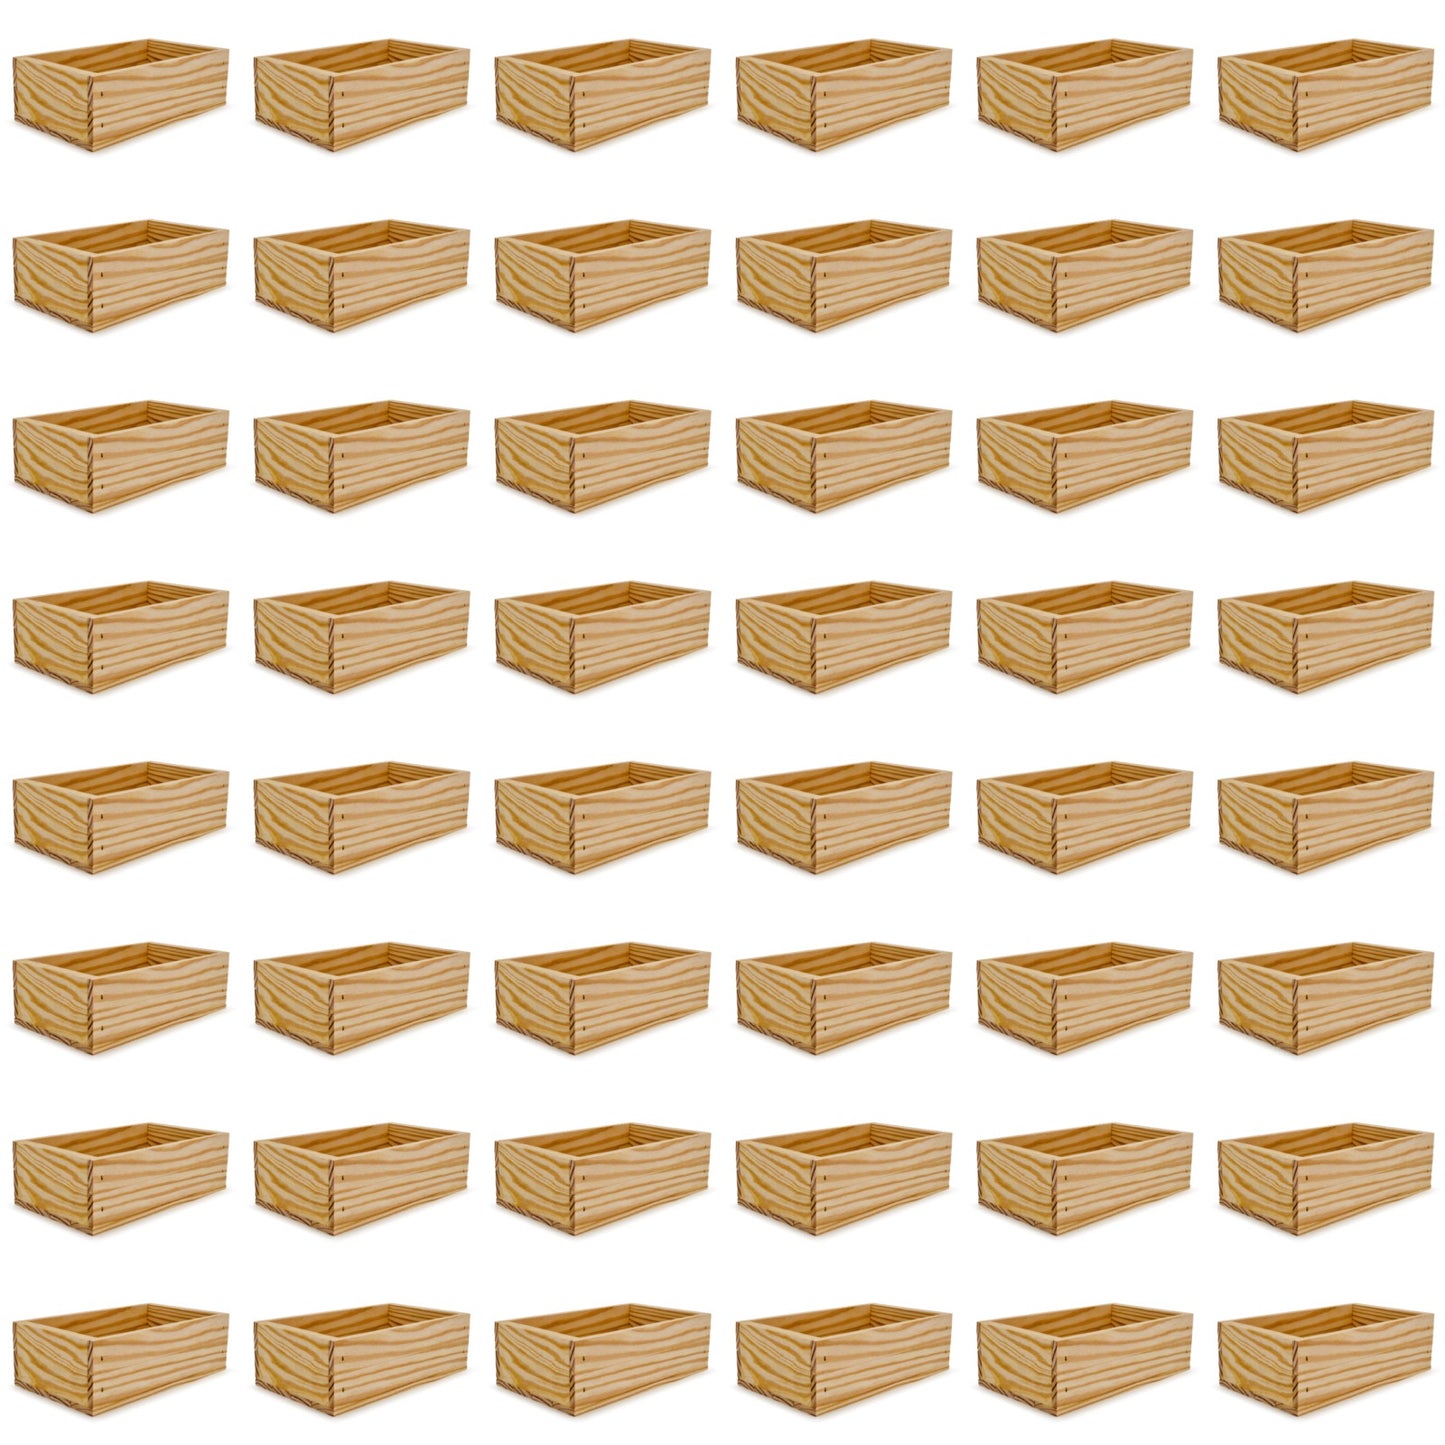 48 Small wooden crates 11x6.25x3.5